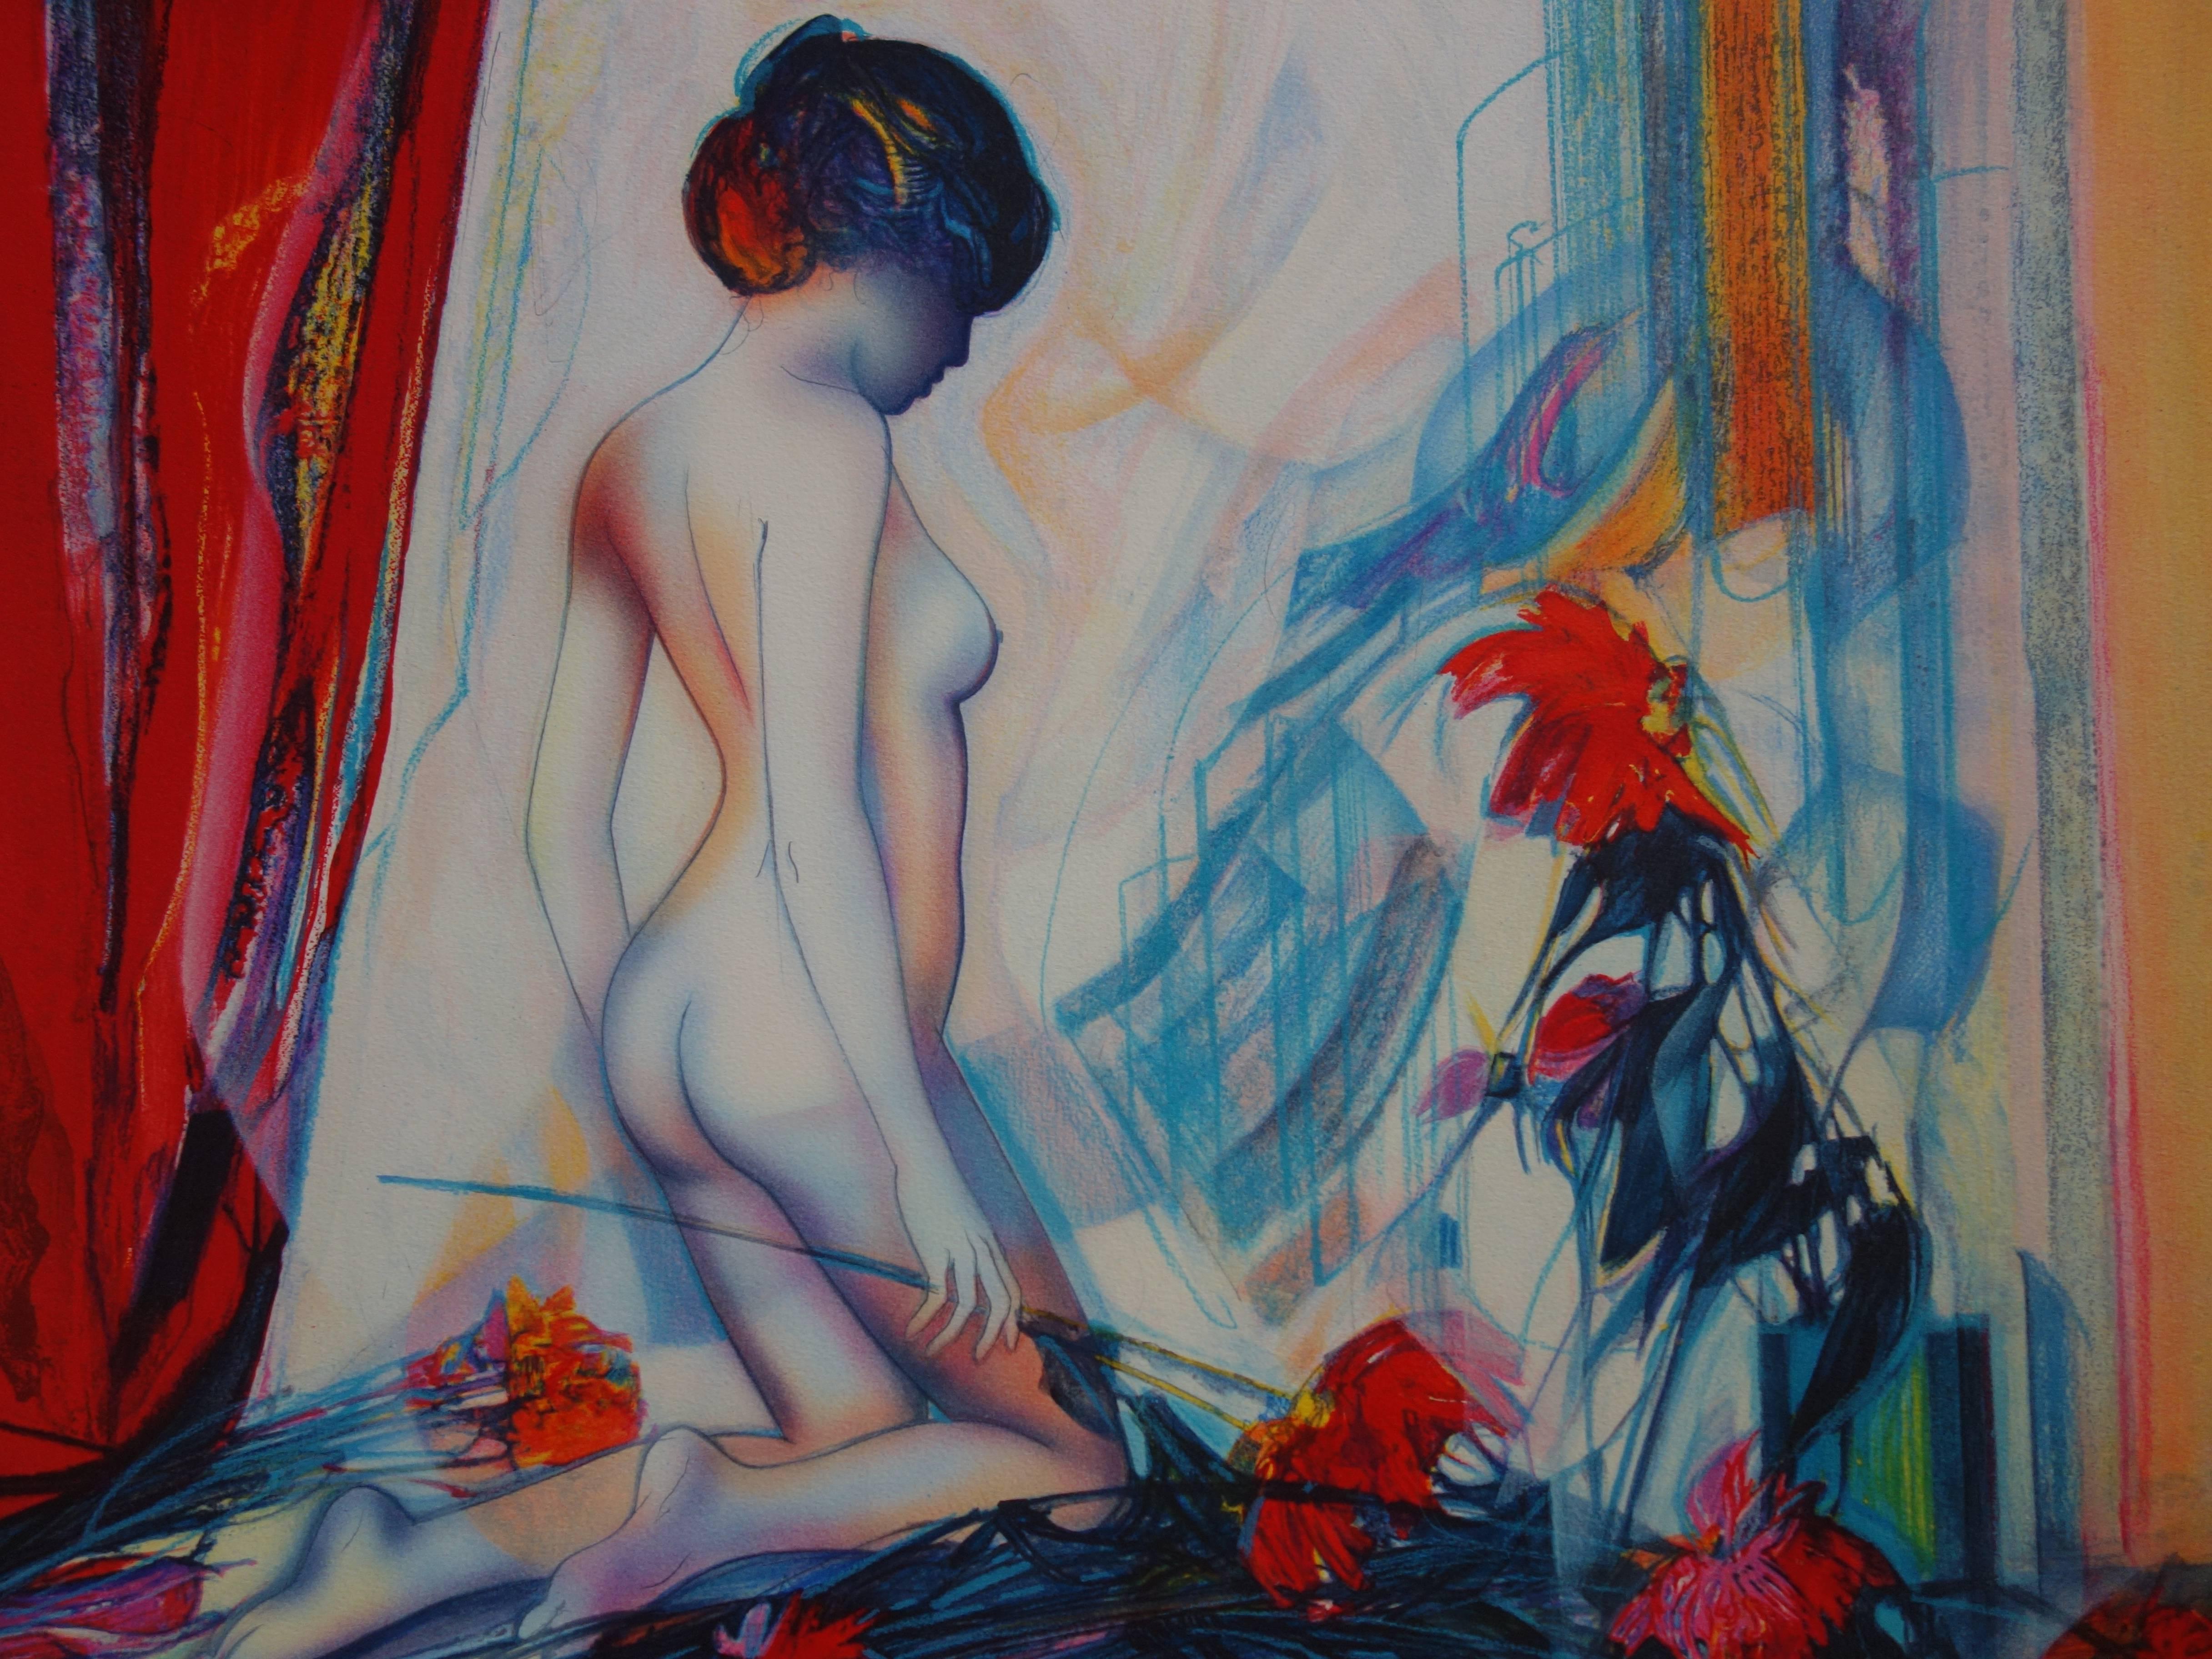 Nude with Dahlias - Original handsigned lithograph - 199ex - Modern Print by Jean-Baptiste Valadie